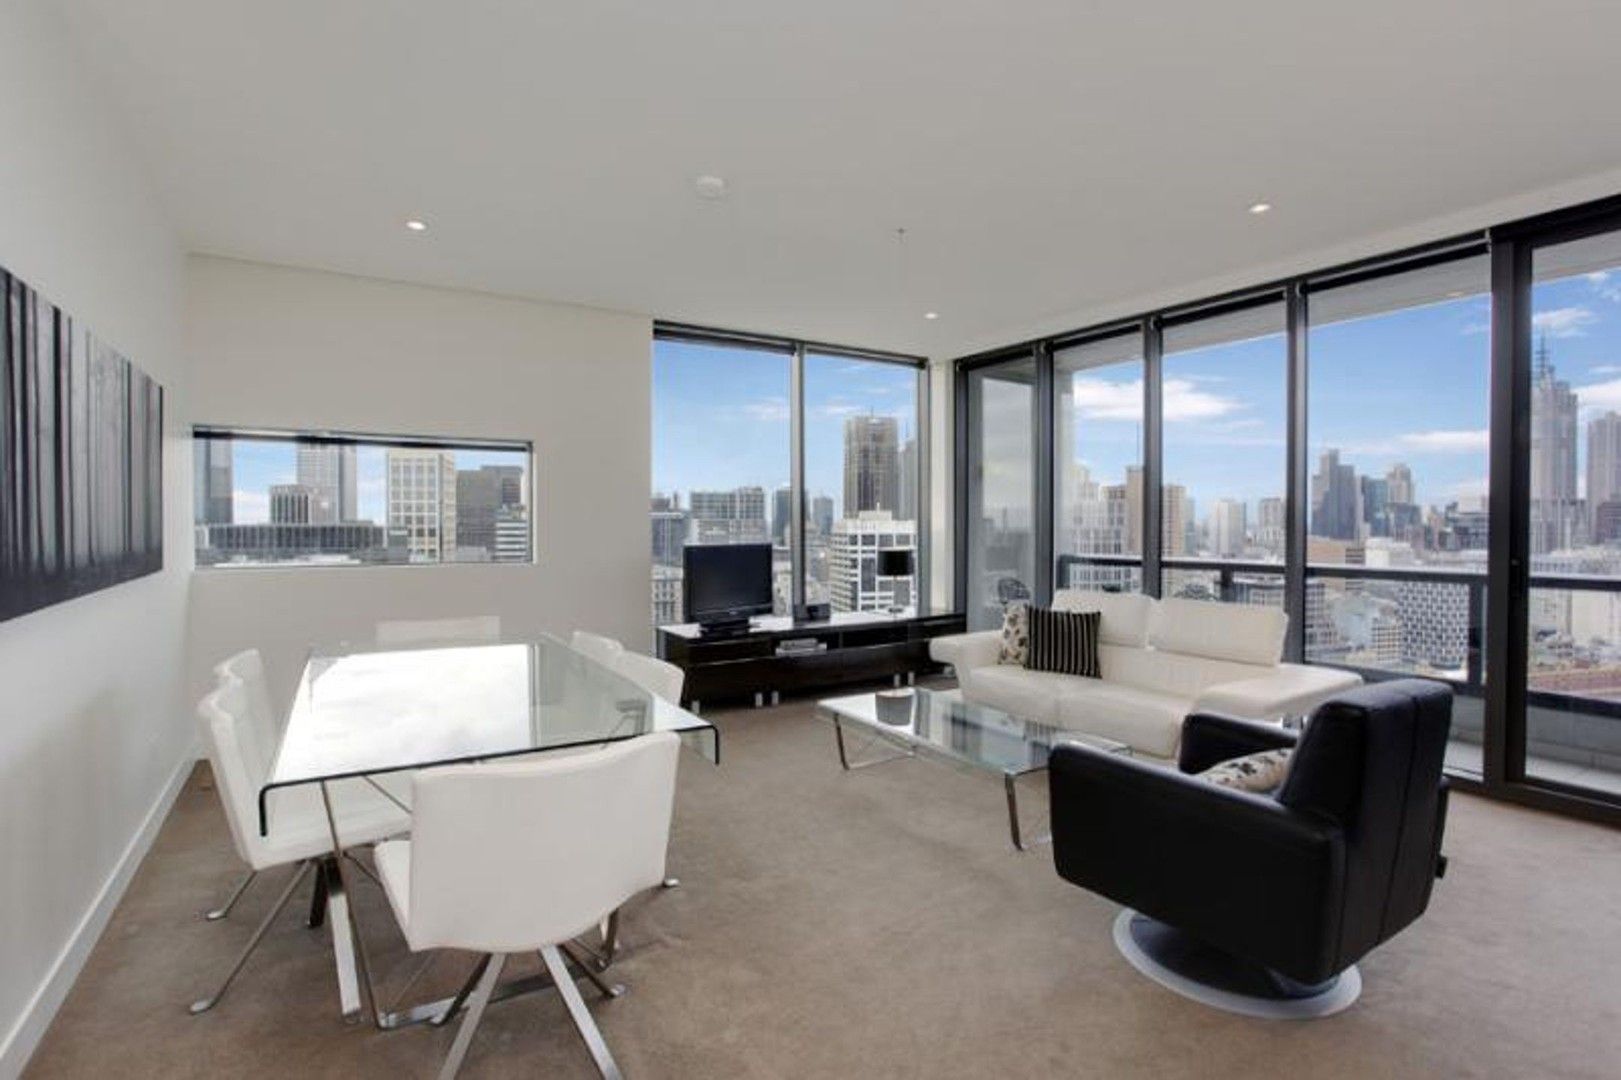 2 bedrooms Apartment / Unit / Flat in 2706/1 Freshwater Place SOUTHBANK VIC, 3006